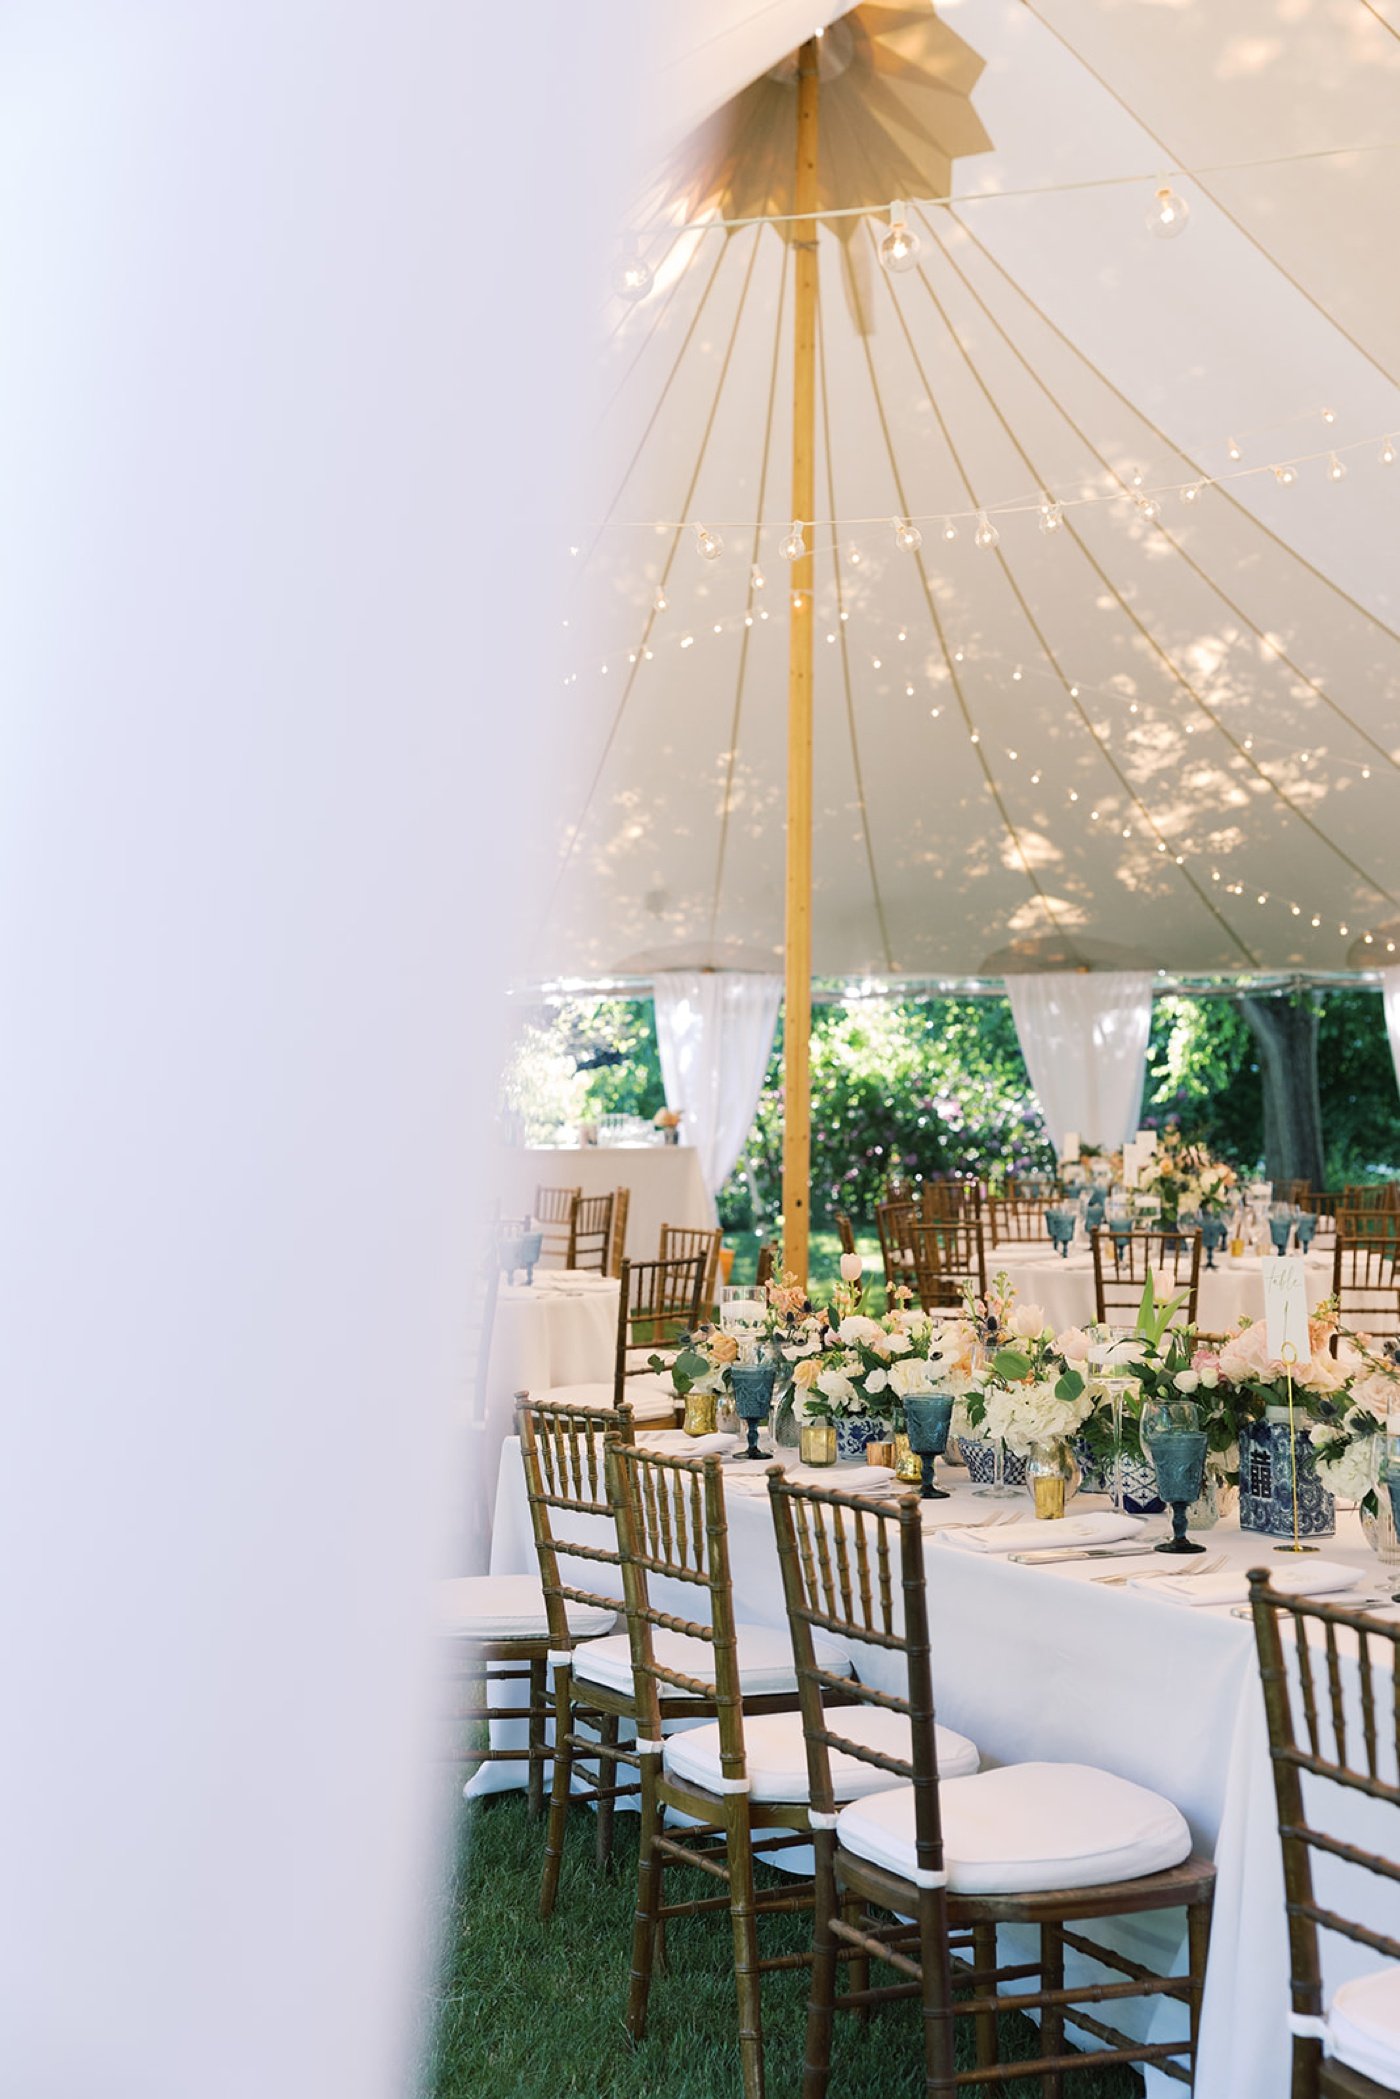 Tented wedding reception at The Garden at Elm Bank